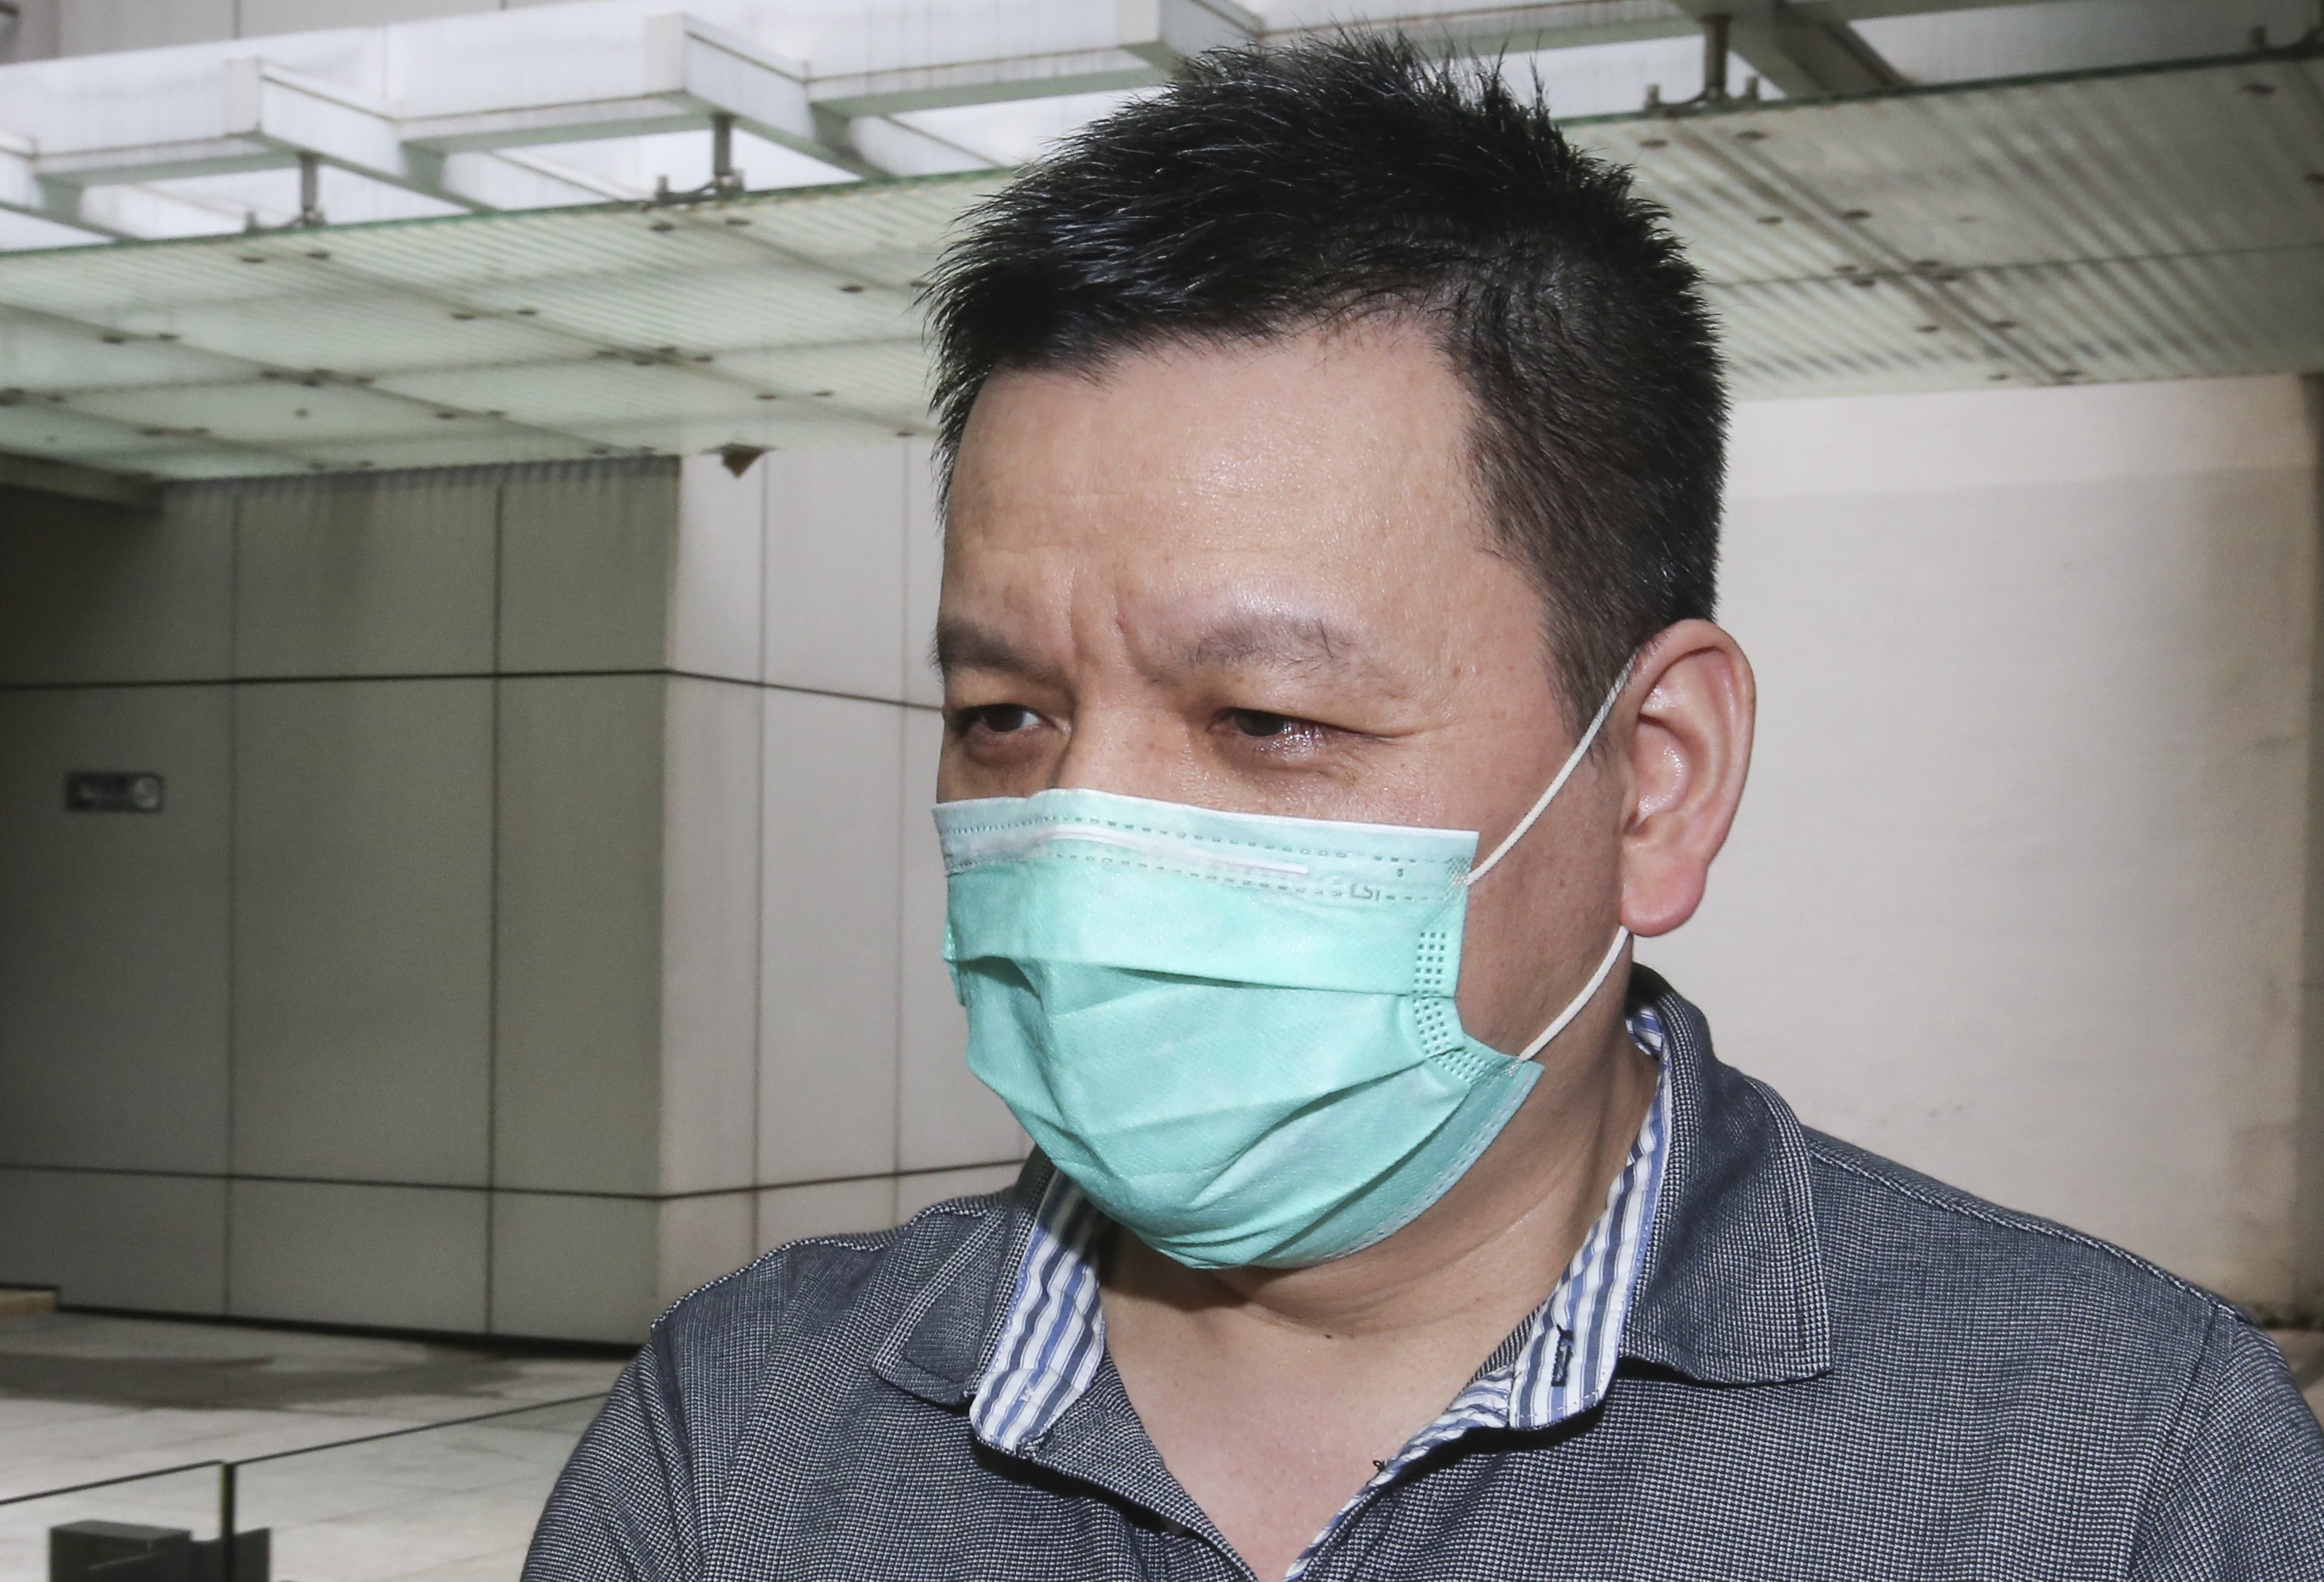 Yeung Kam-hoi said he would have stopped his wife from doing the treatment if he had known of the risk involved. Photo: K. Y. Cheng